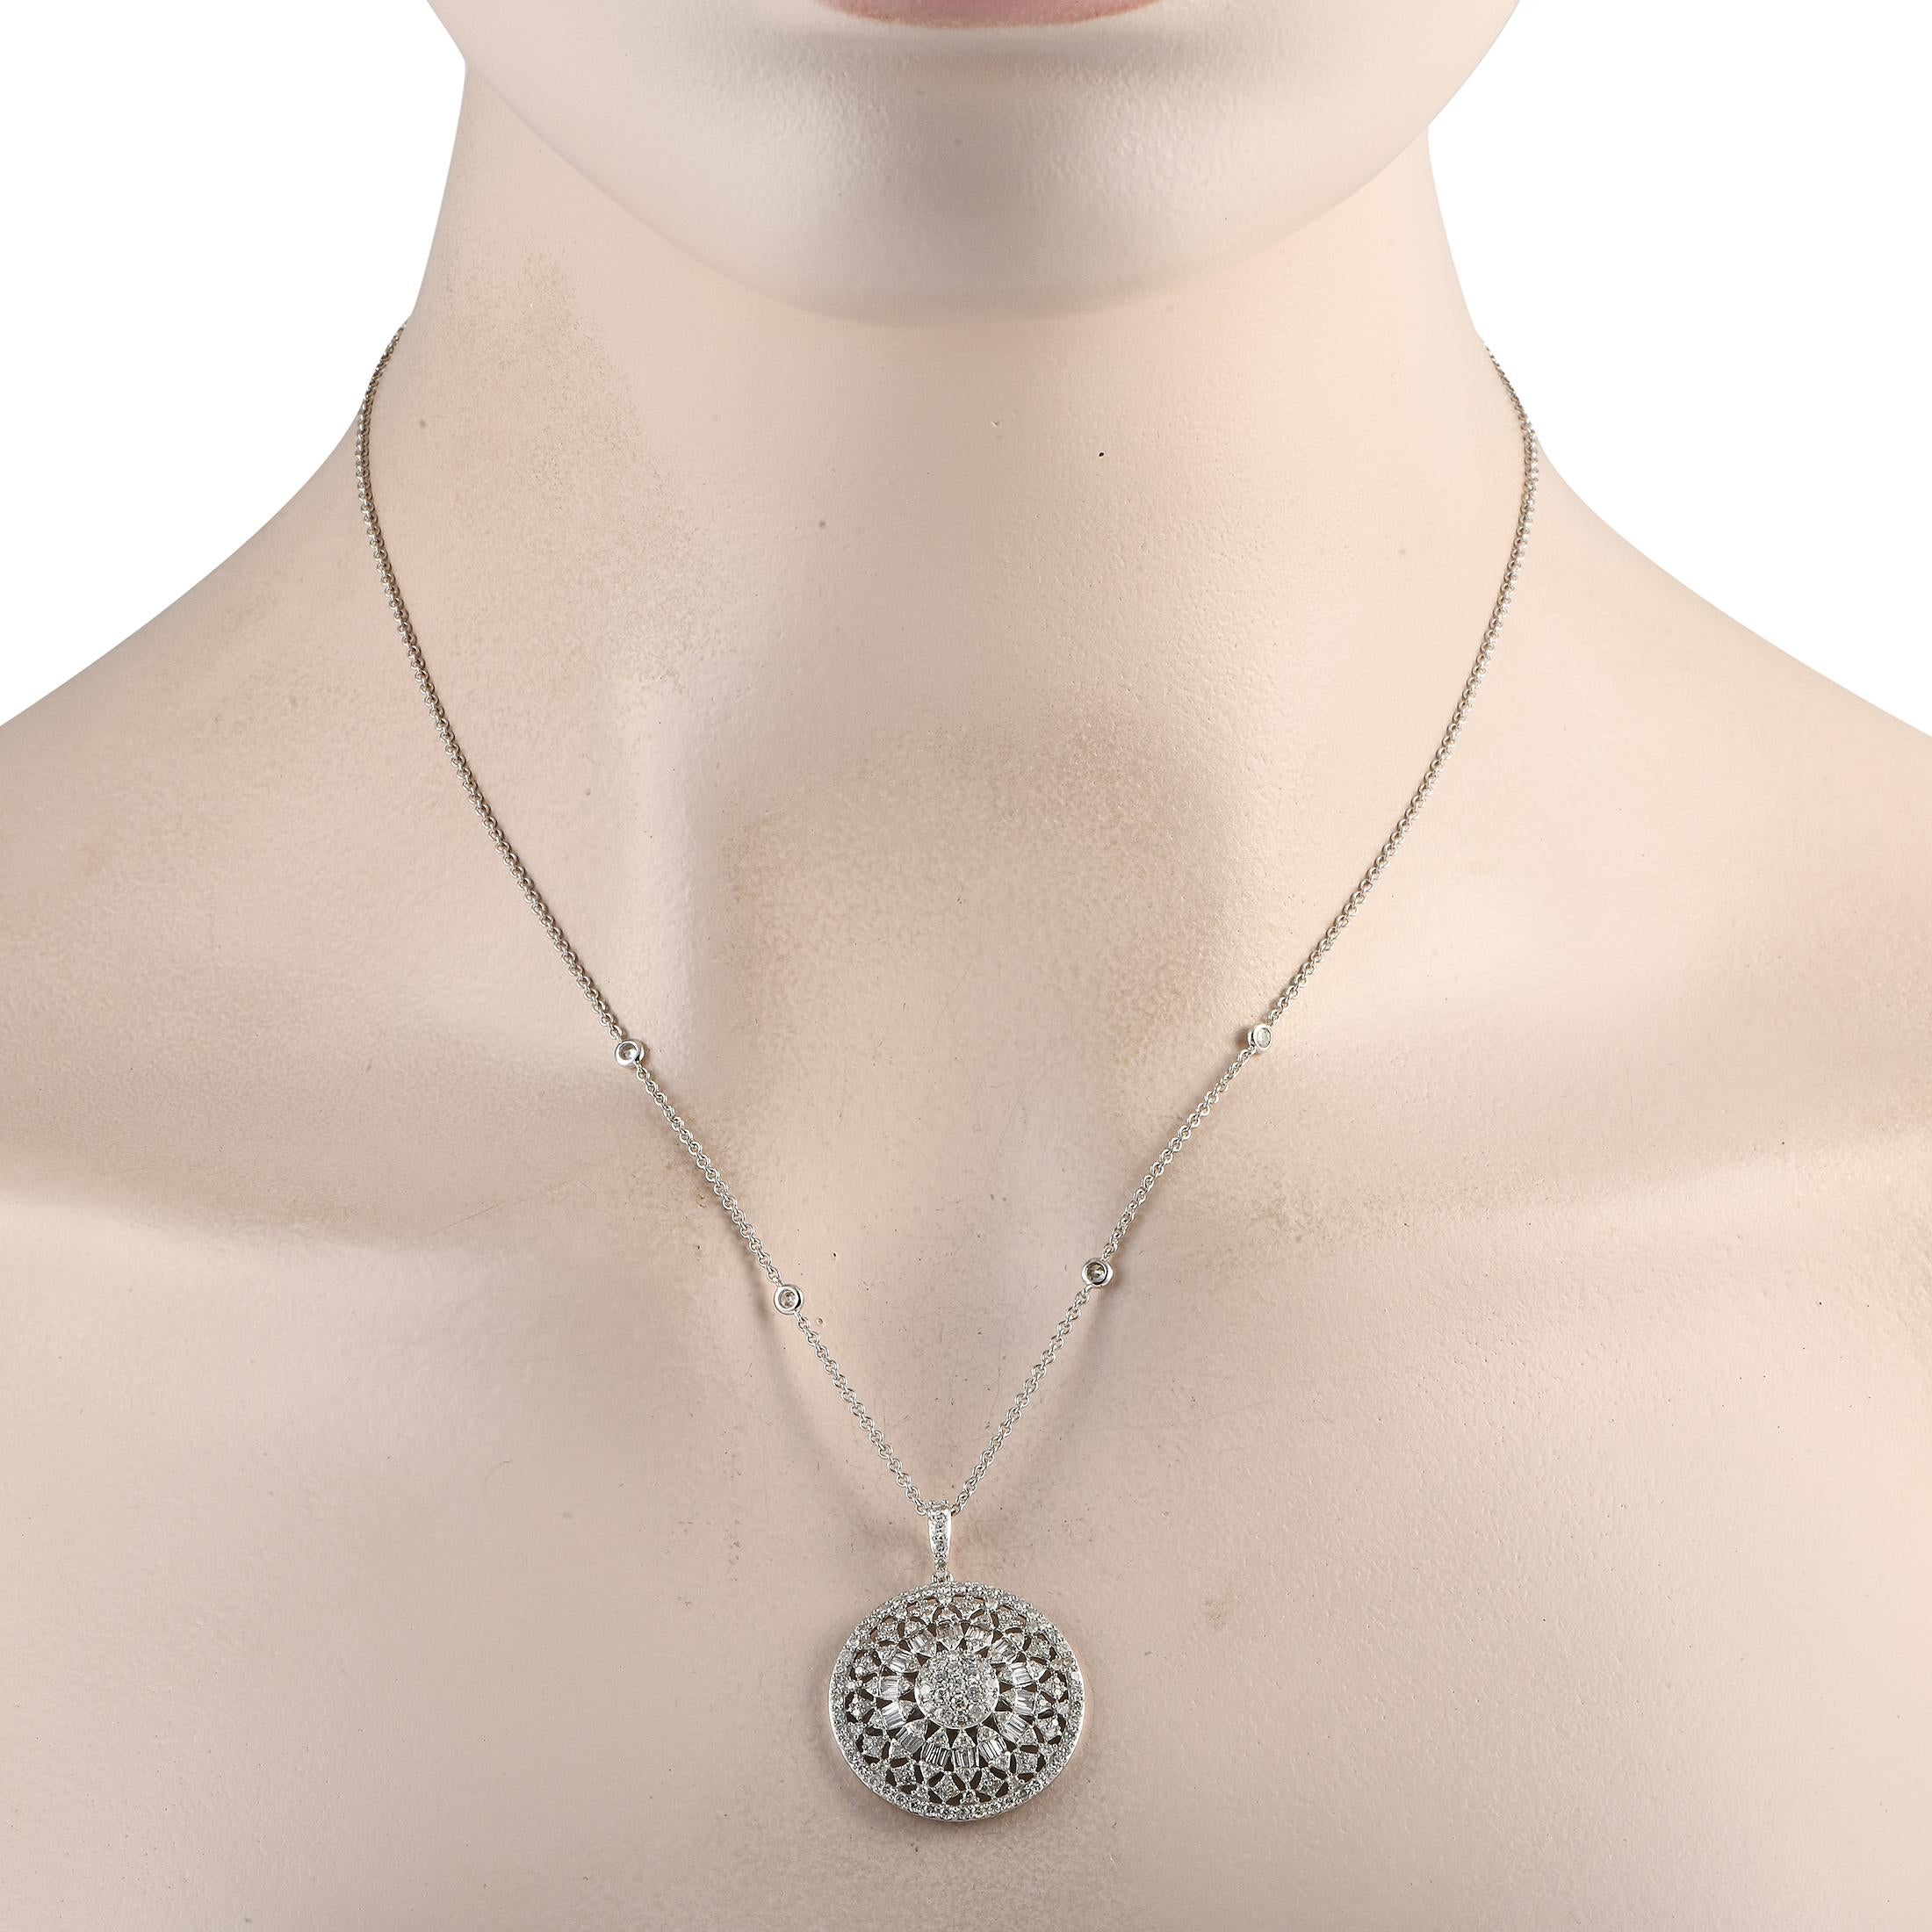 An intricate 14K White Gold pendant measuring 1.25 long by 1.0 wide makes a statement on this necklace. This elegant accessory features a delicate 18 chain and comes to life thanks to Diamonds with a total weight of 1.75 carats.This jewelry piece is